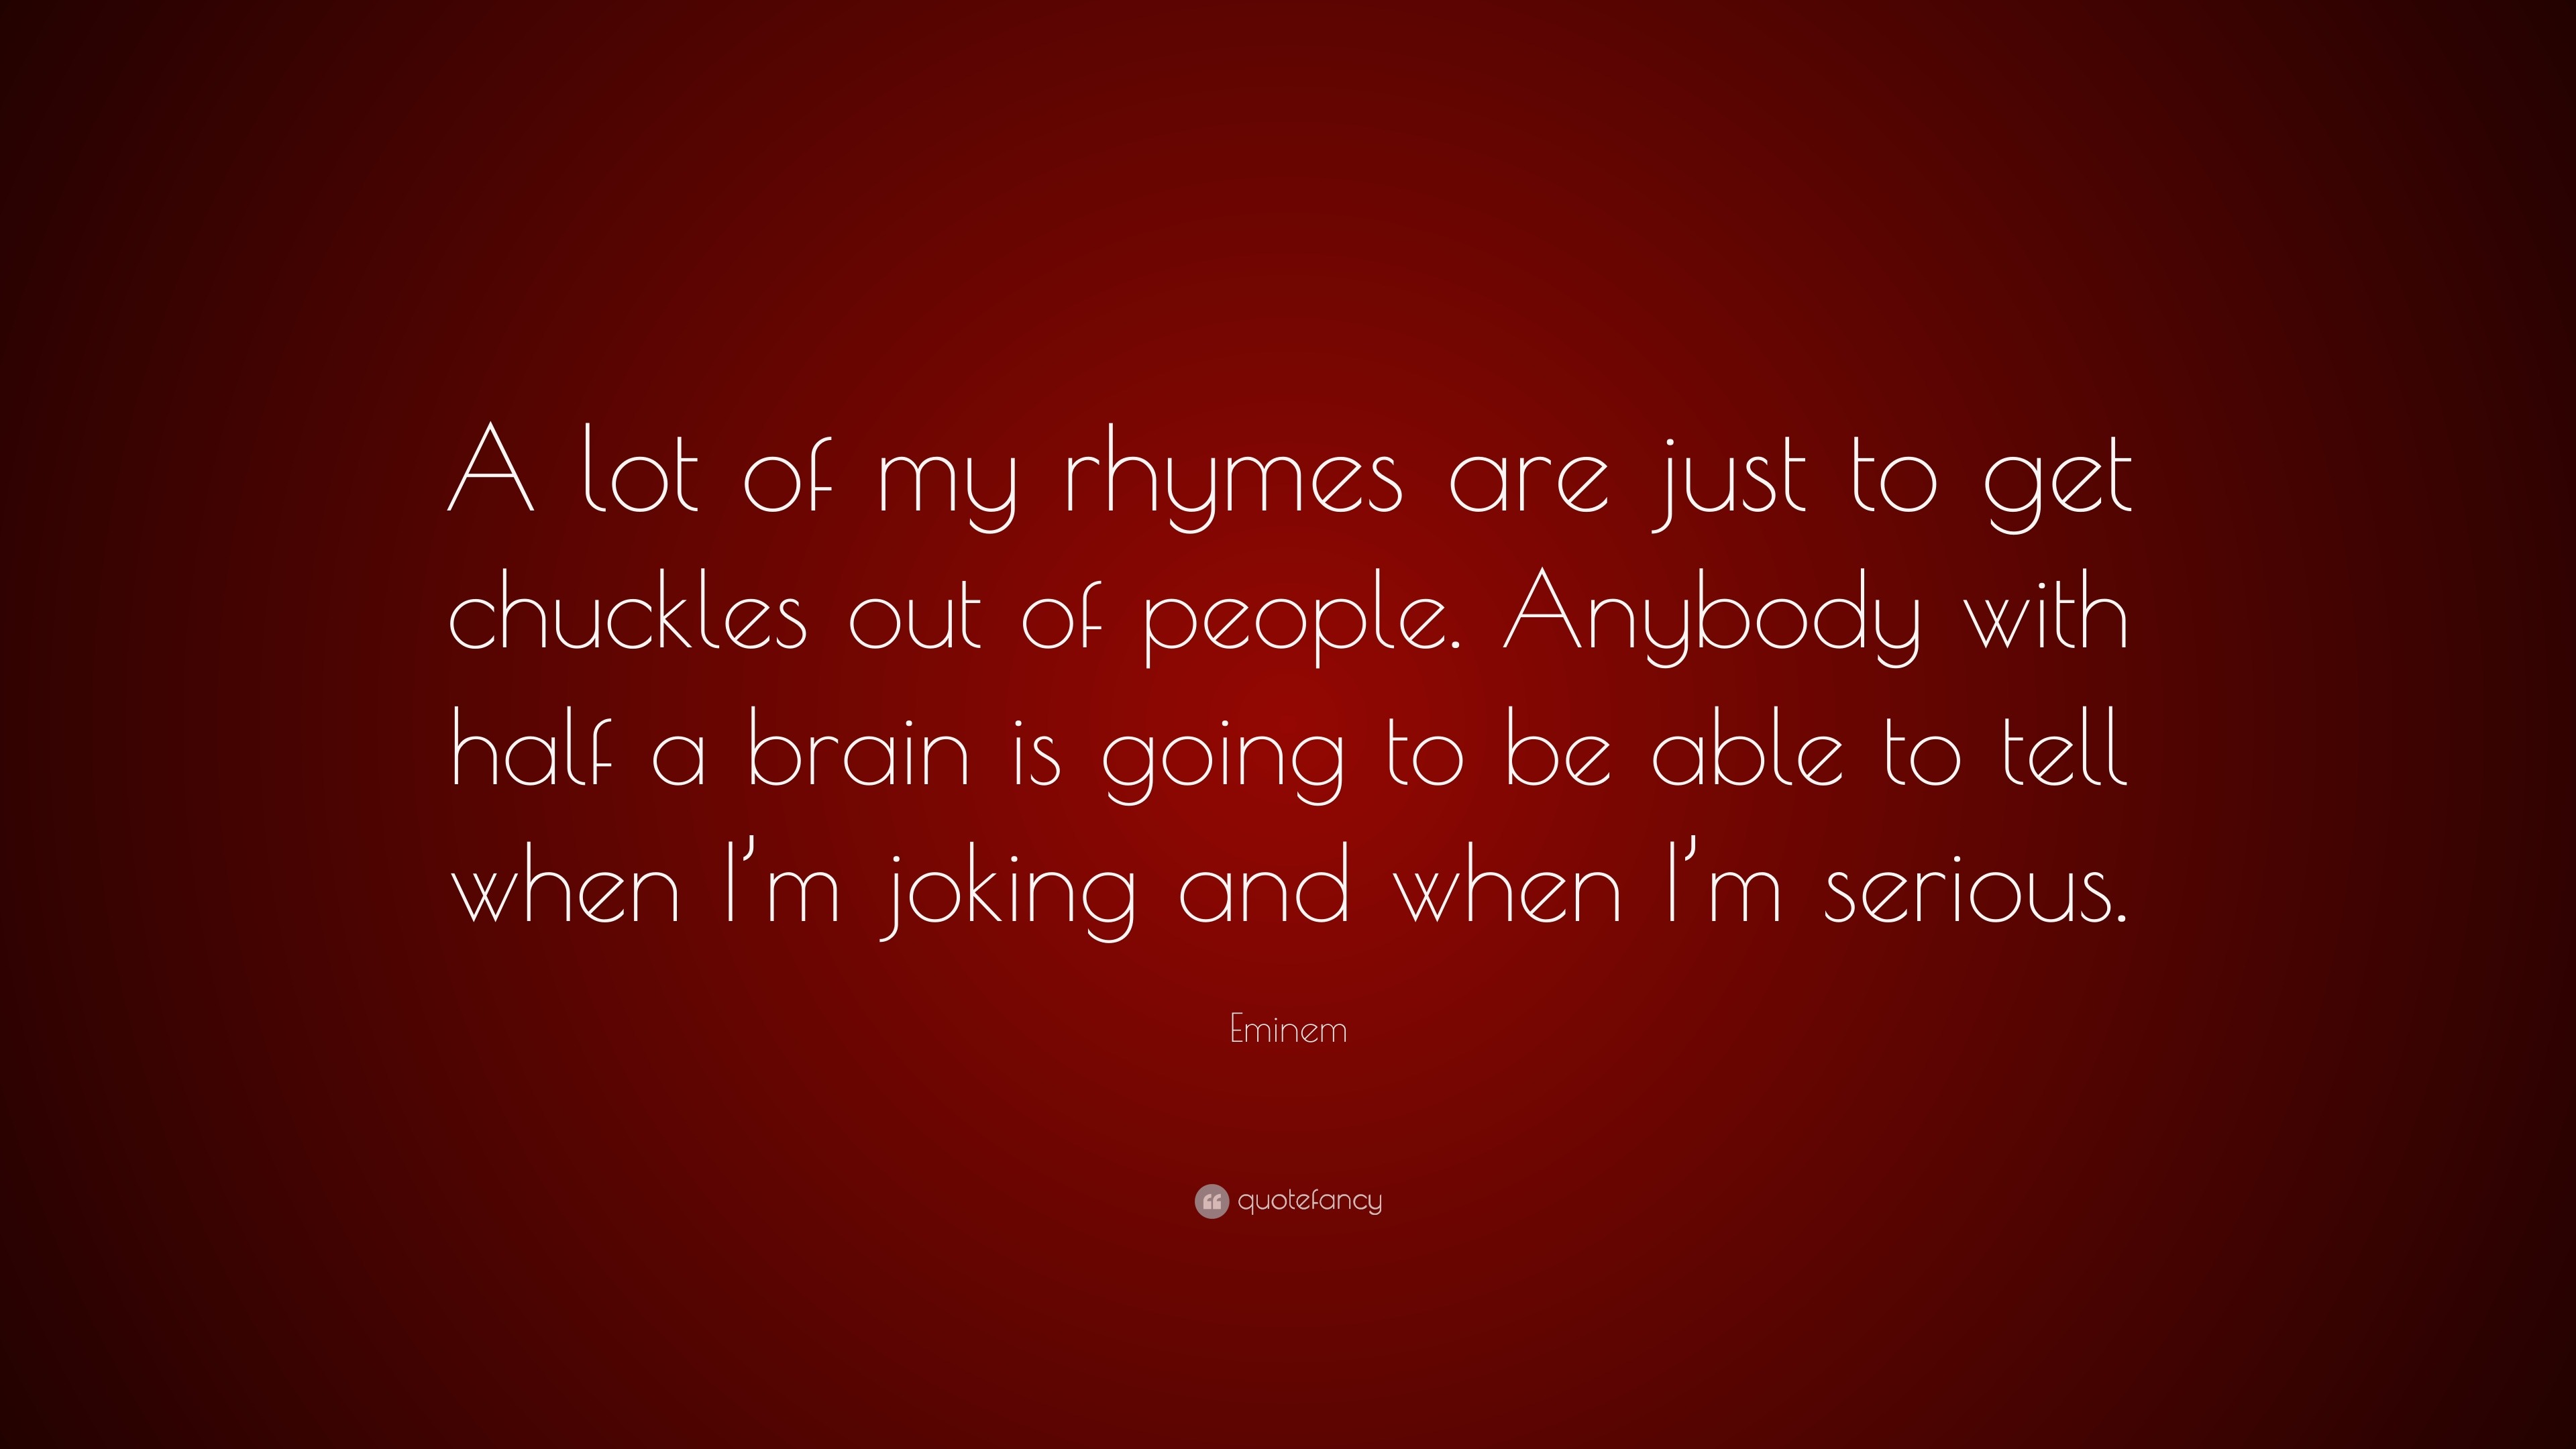 Eminem Quote: “A lot of my rhymes are just to get chuckles out of ...